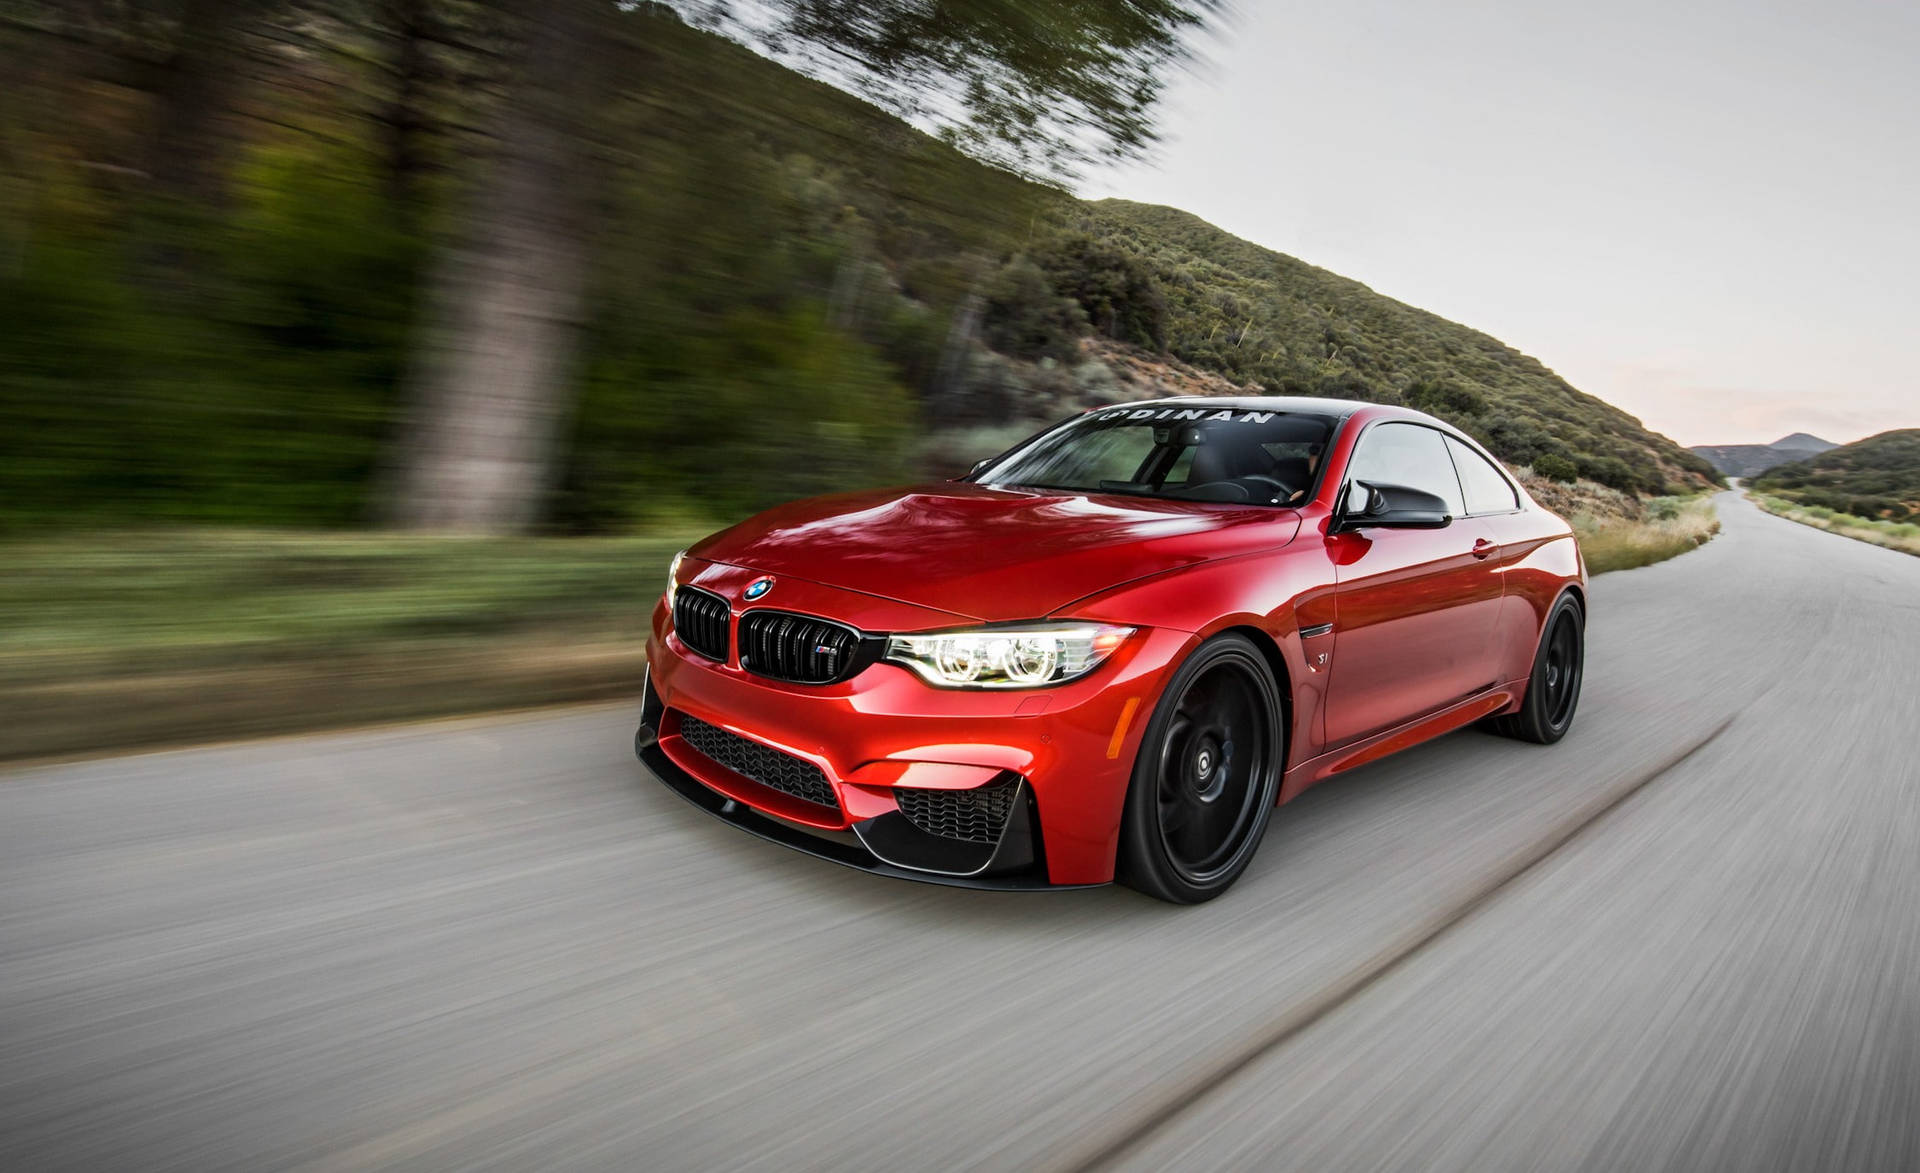 Bmw M4 Zooming On The Road Background